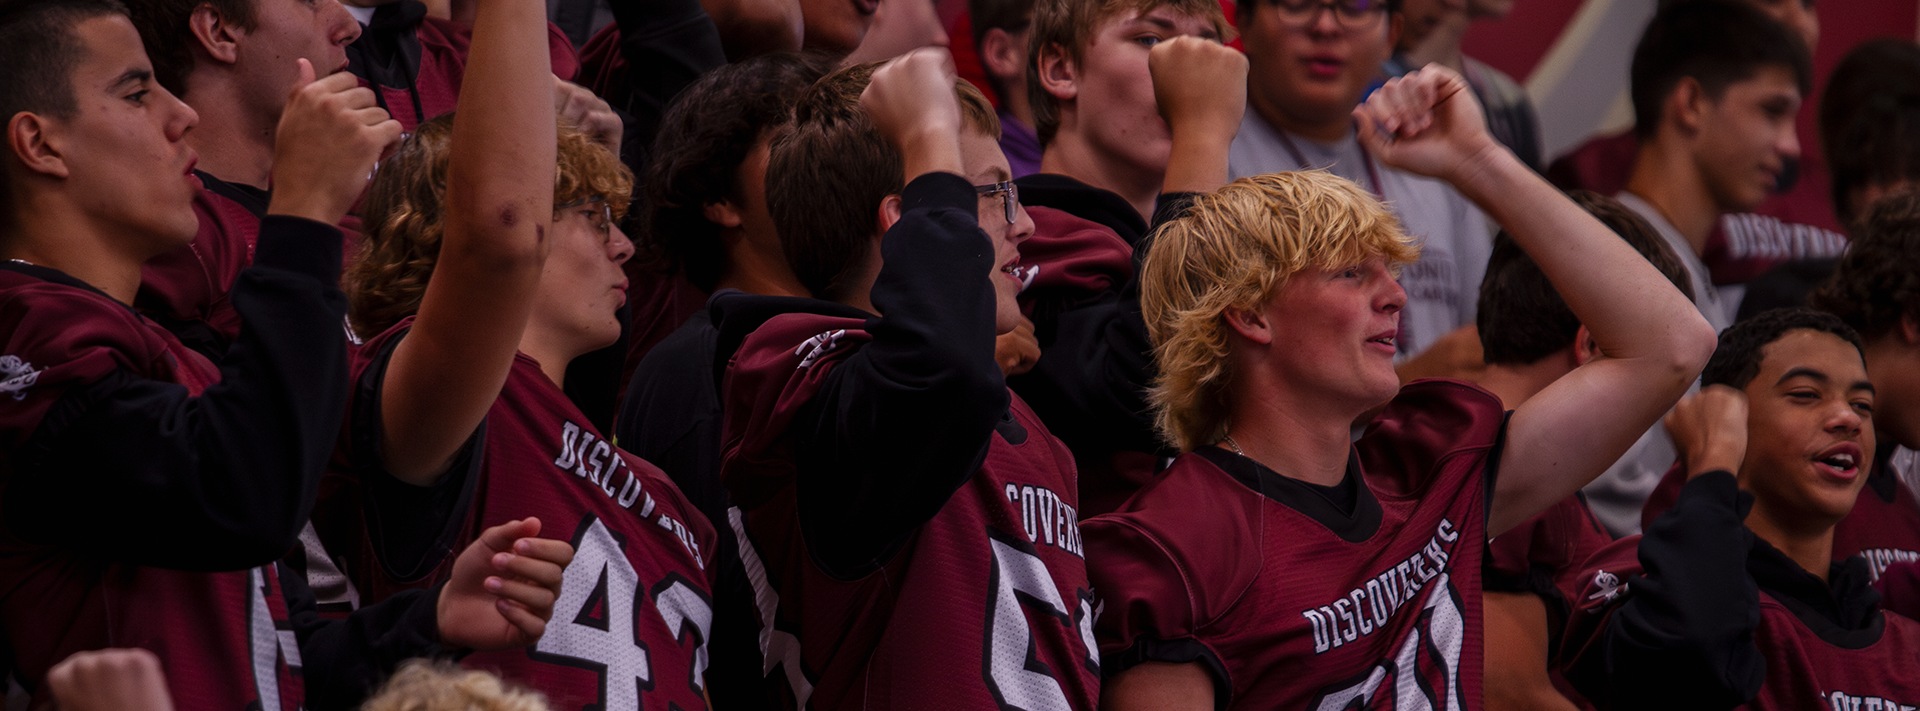 A group of Sophomore football players cheer during the CHS Homecoming Pep Rally.